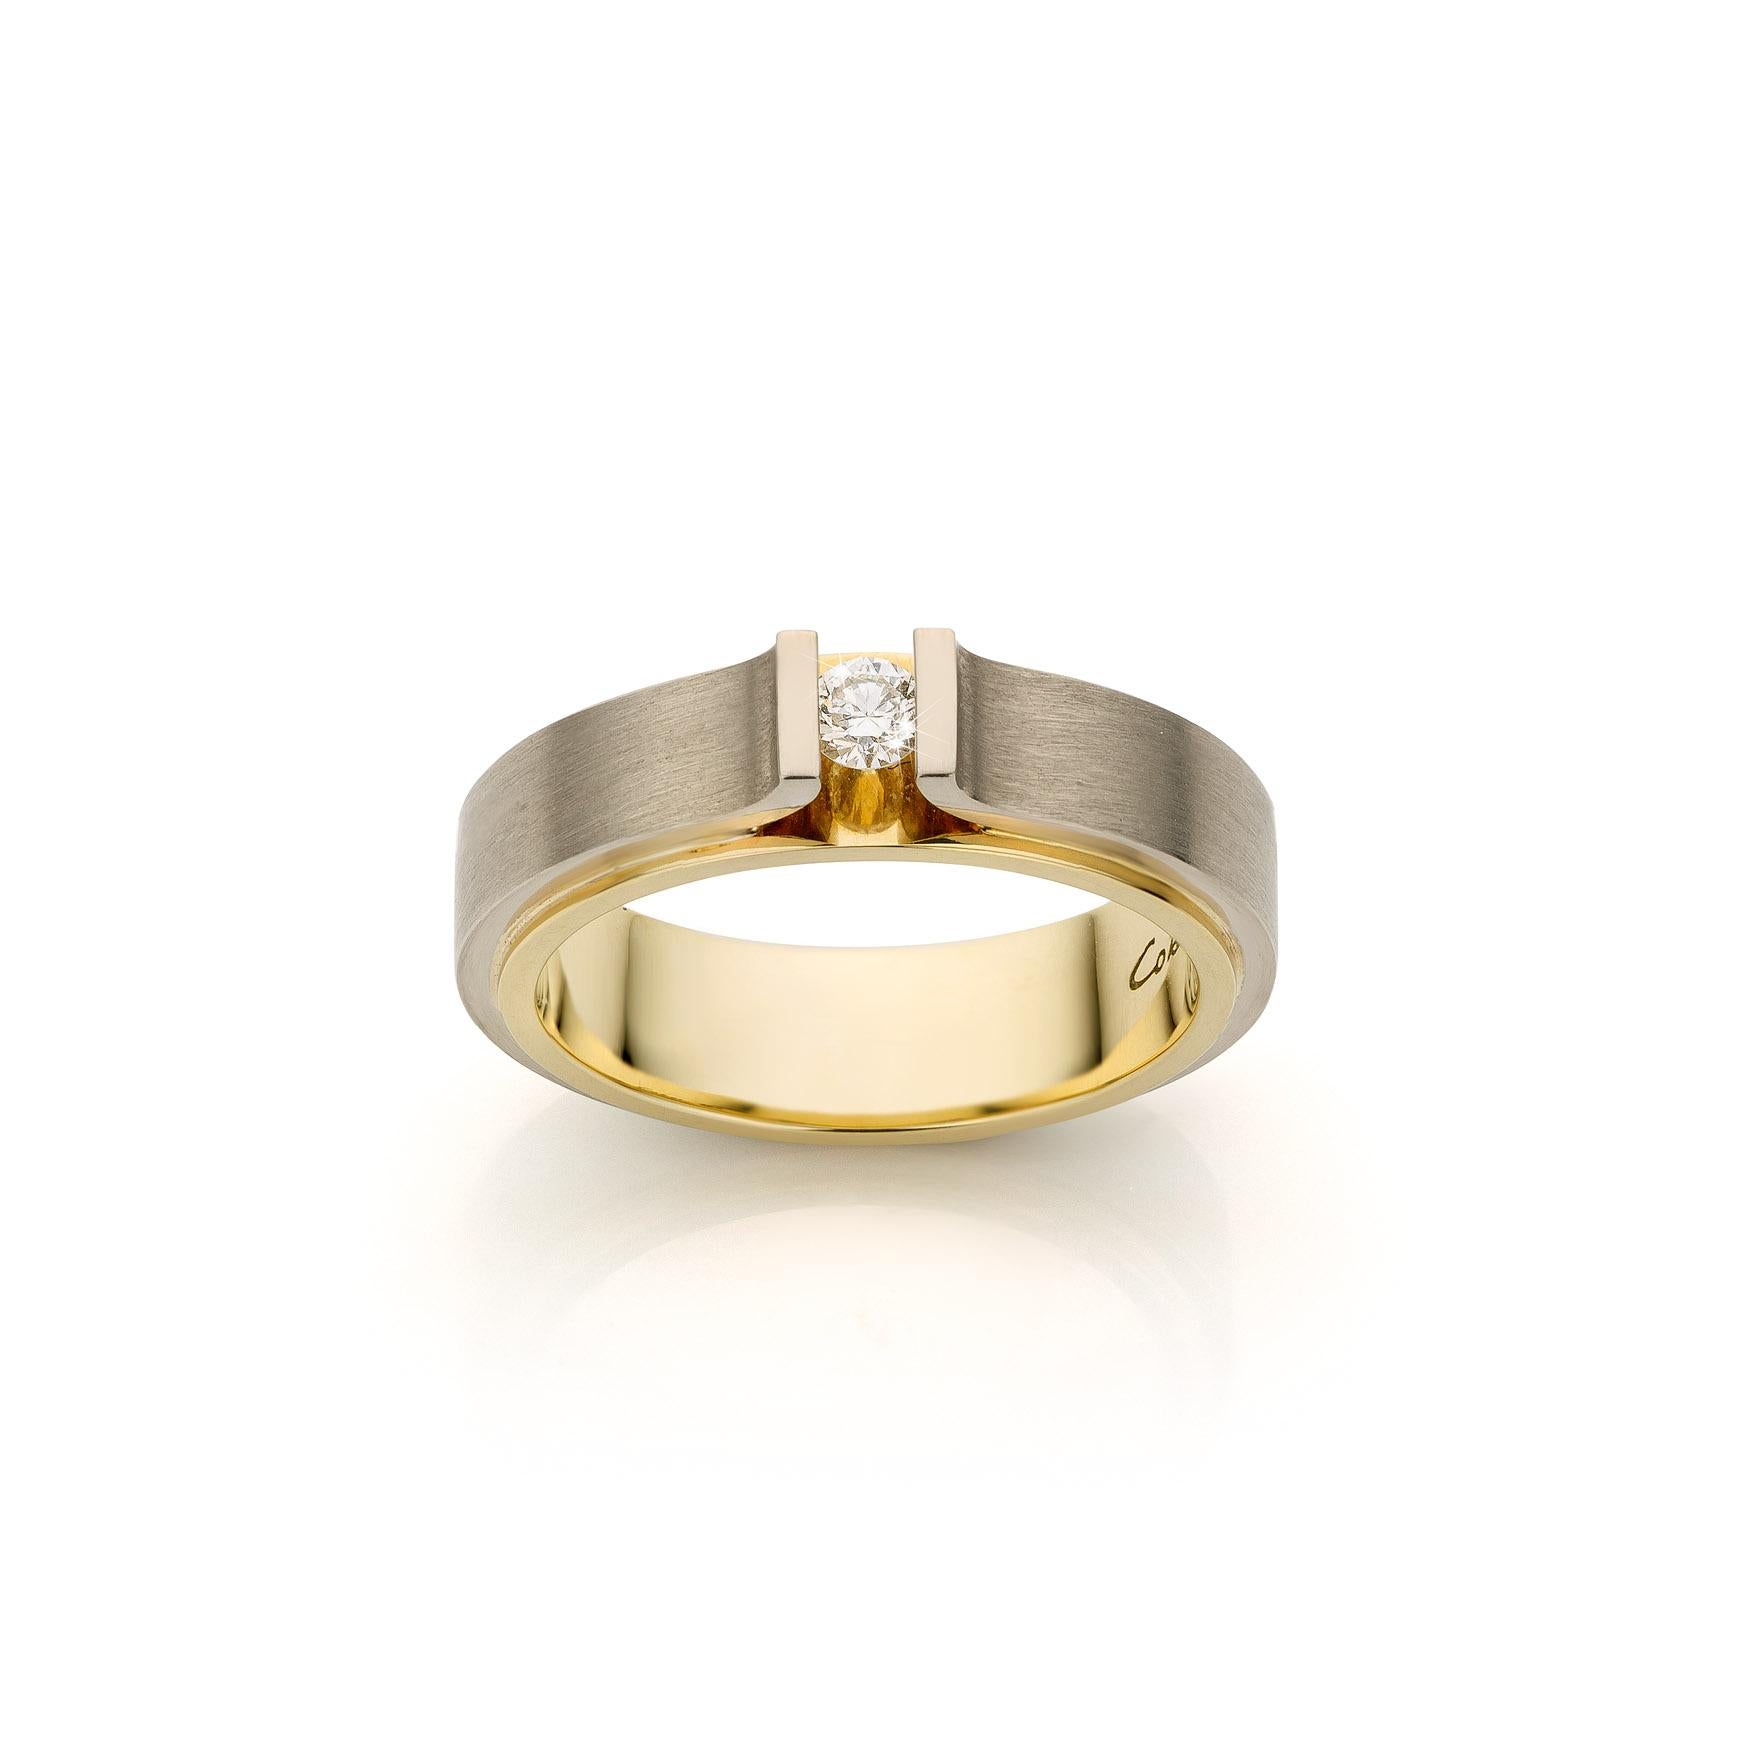 For Sale:  Cober “Corona avenue” white and yellow gold and a Diamond 0.12 ct Wedding Rings  2